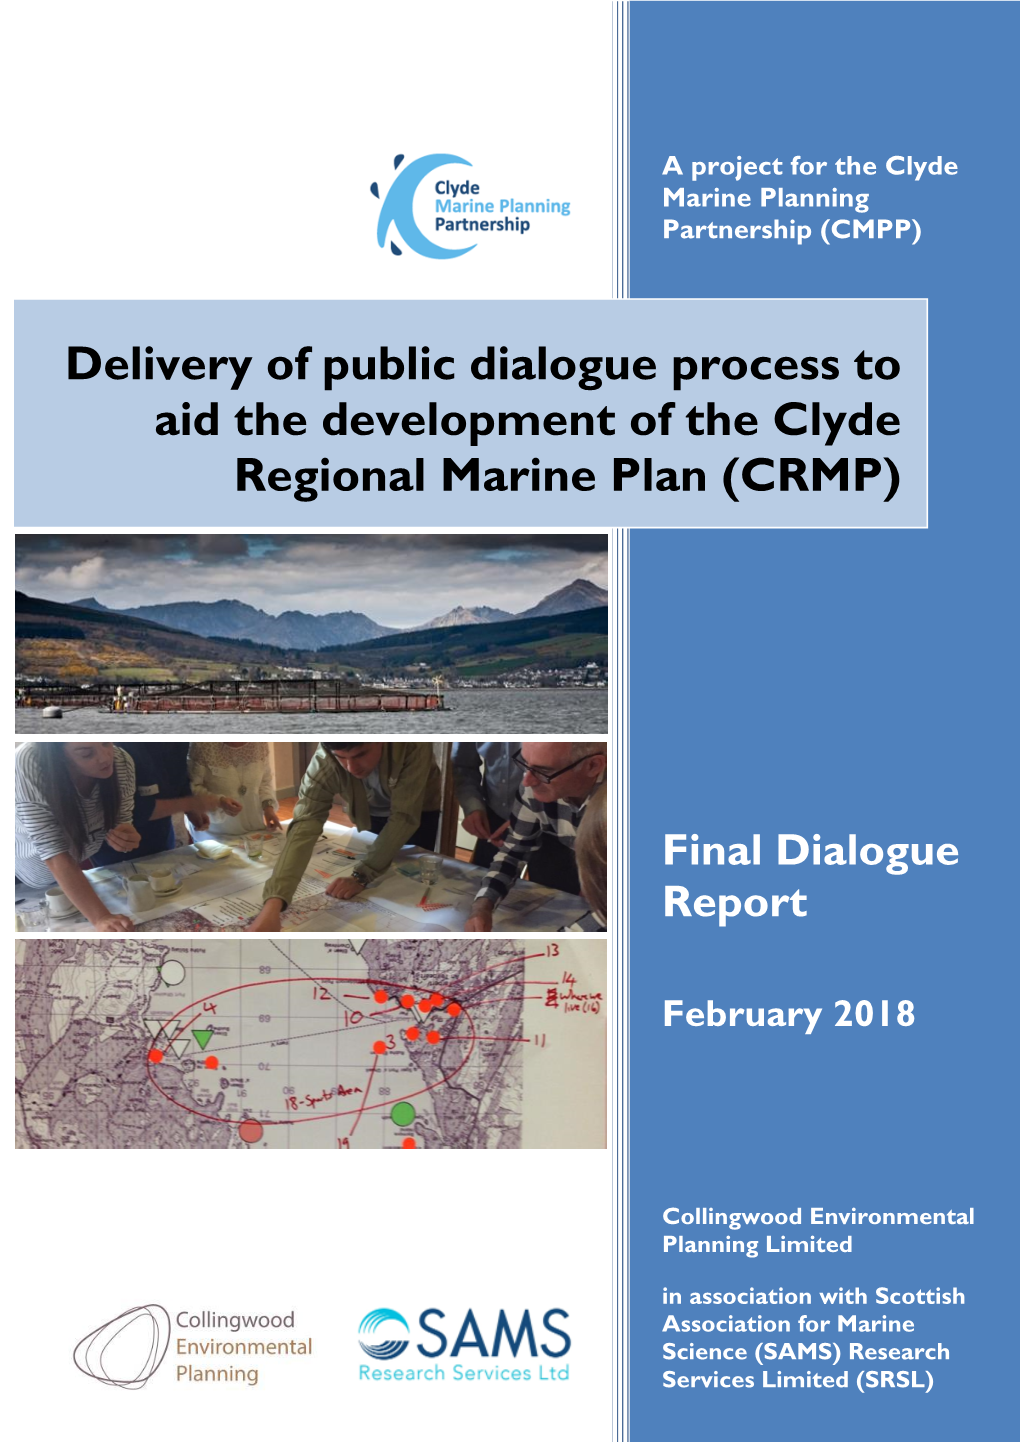 Delivery of Public Dialogue Process to Aid the Development of the Clyde Regional Marine Plan (CRMP)